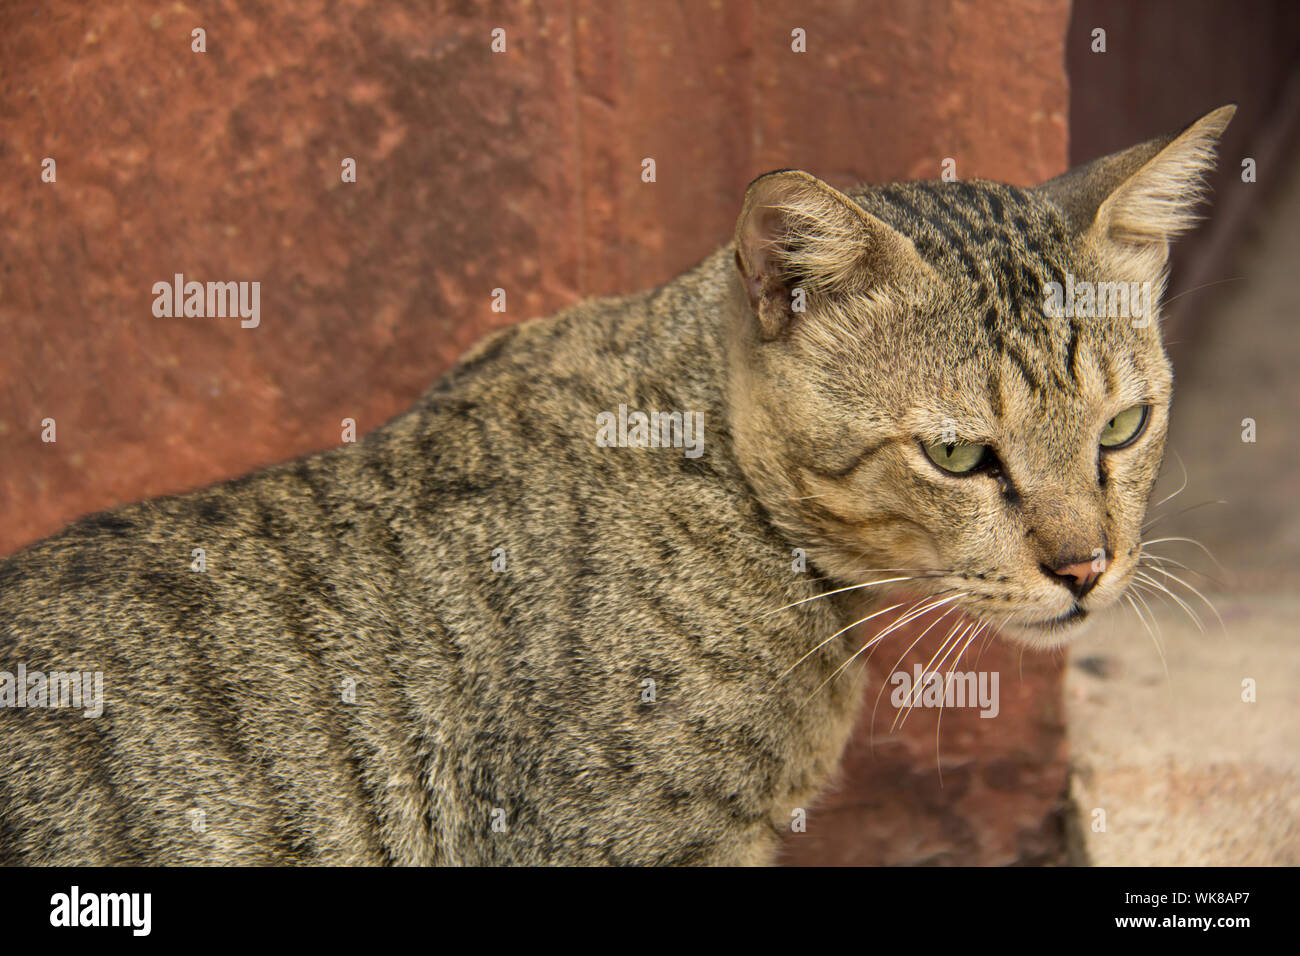 Close-up of a cat Stock Photo